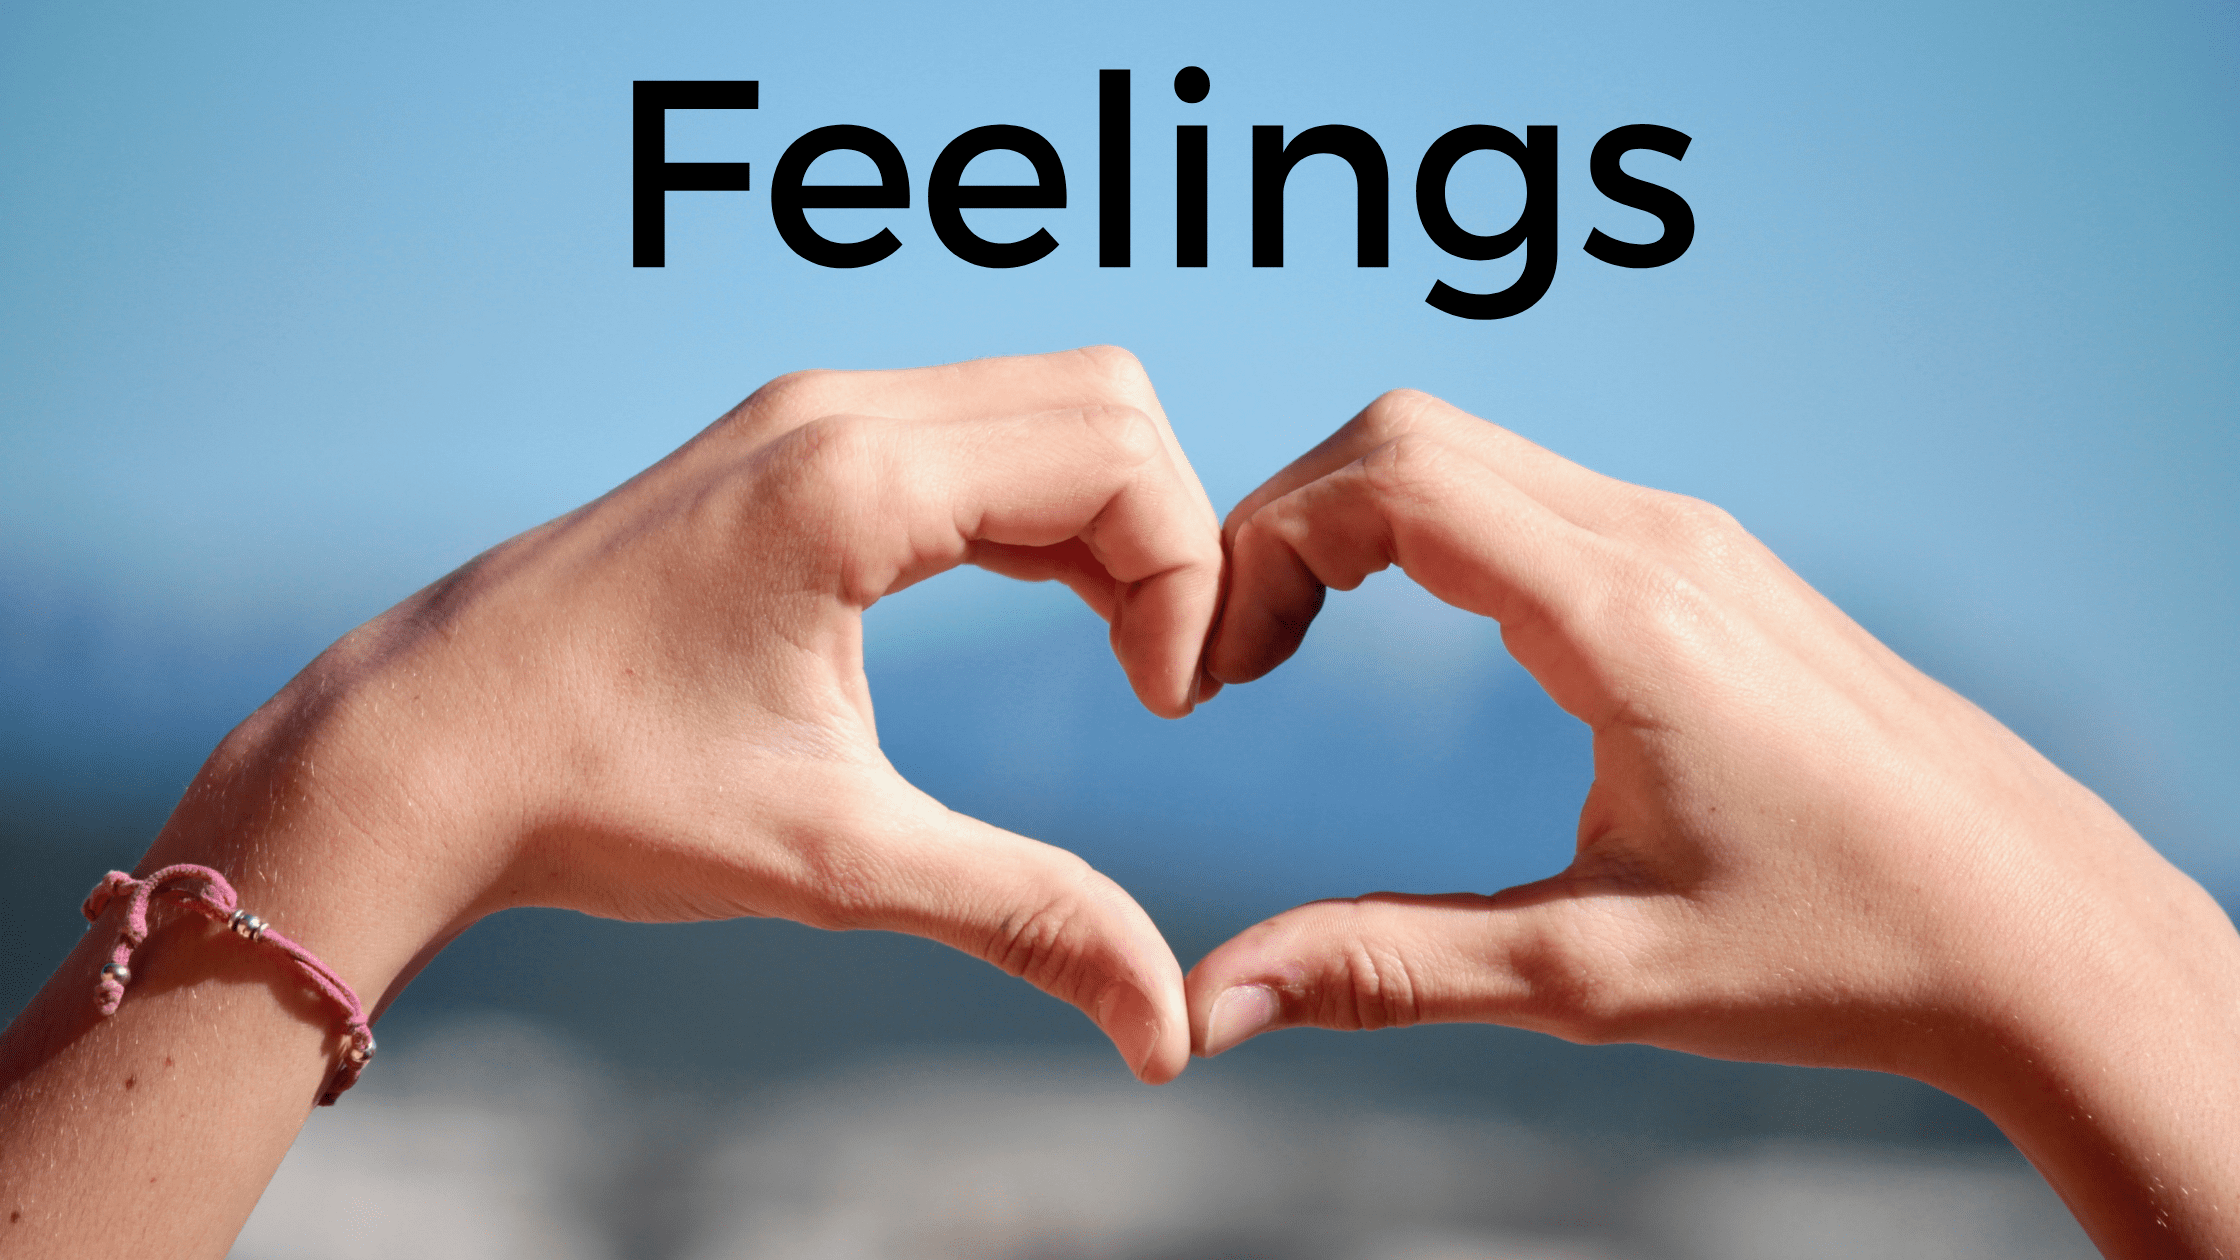 feelings English vocabulary learn online games exercises